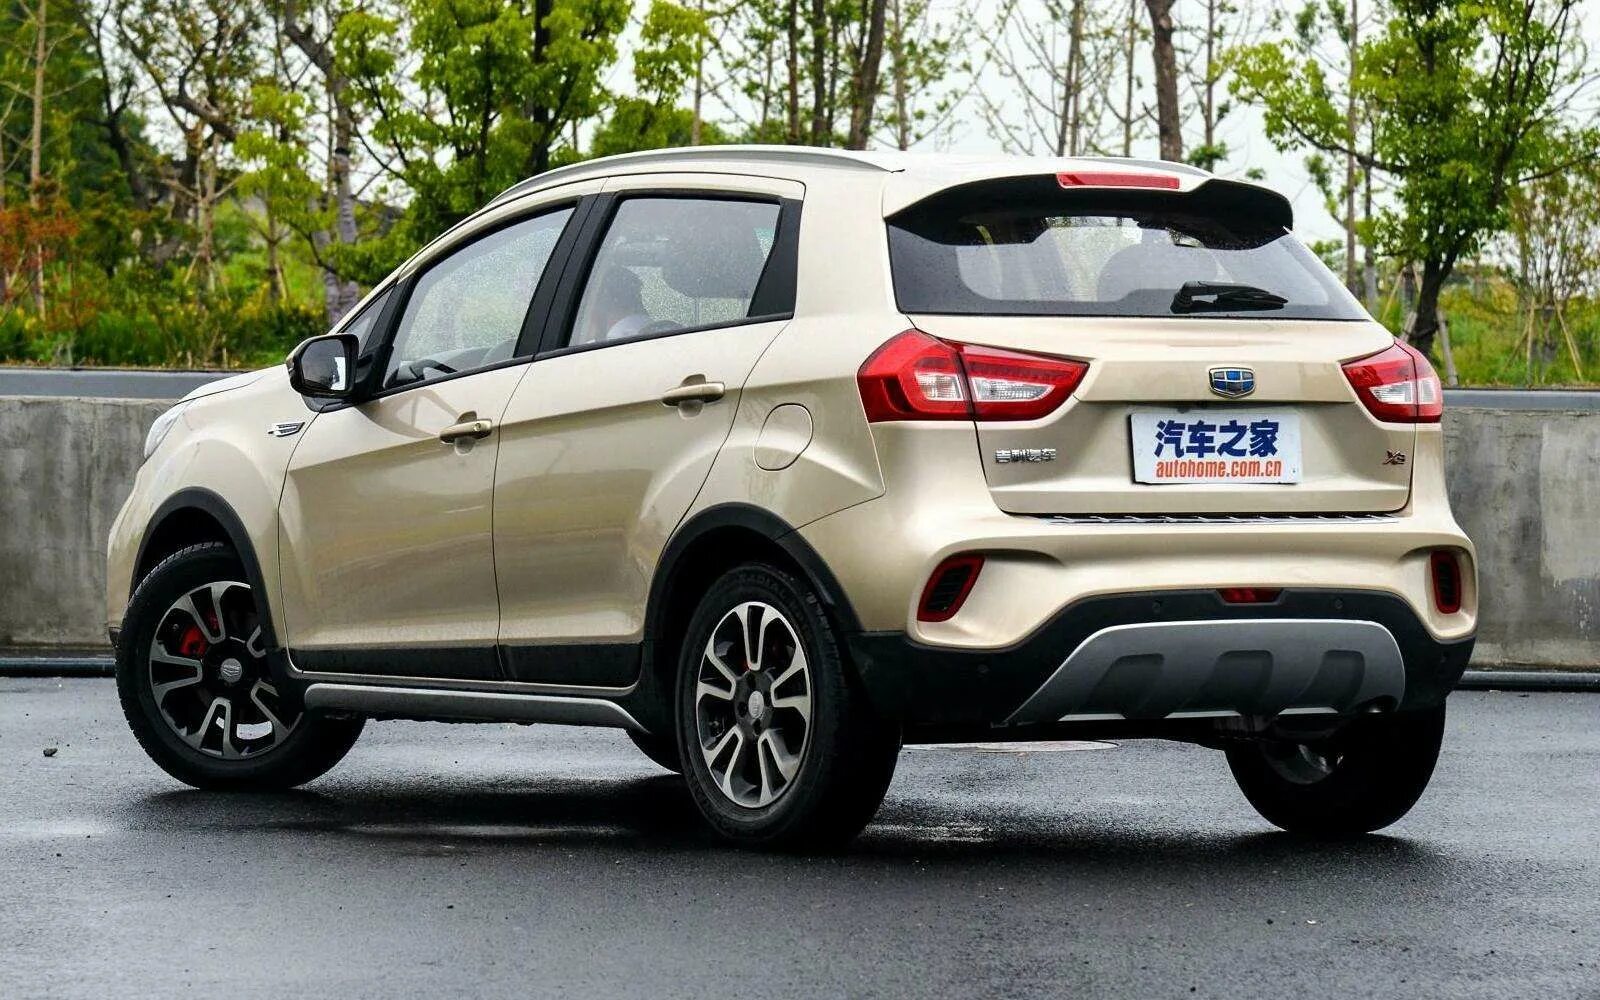 Geely Yuanjing x3. Geely Vision x3. Geely x ray. Geely Vision x3 Pro.